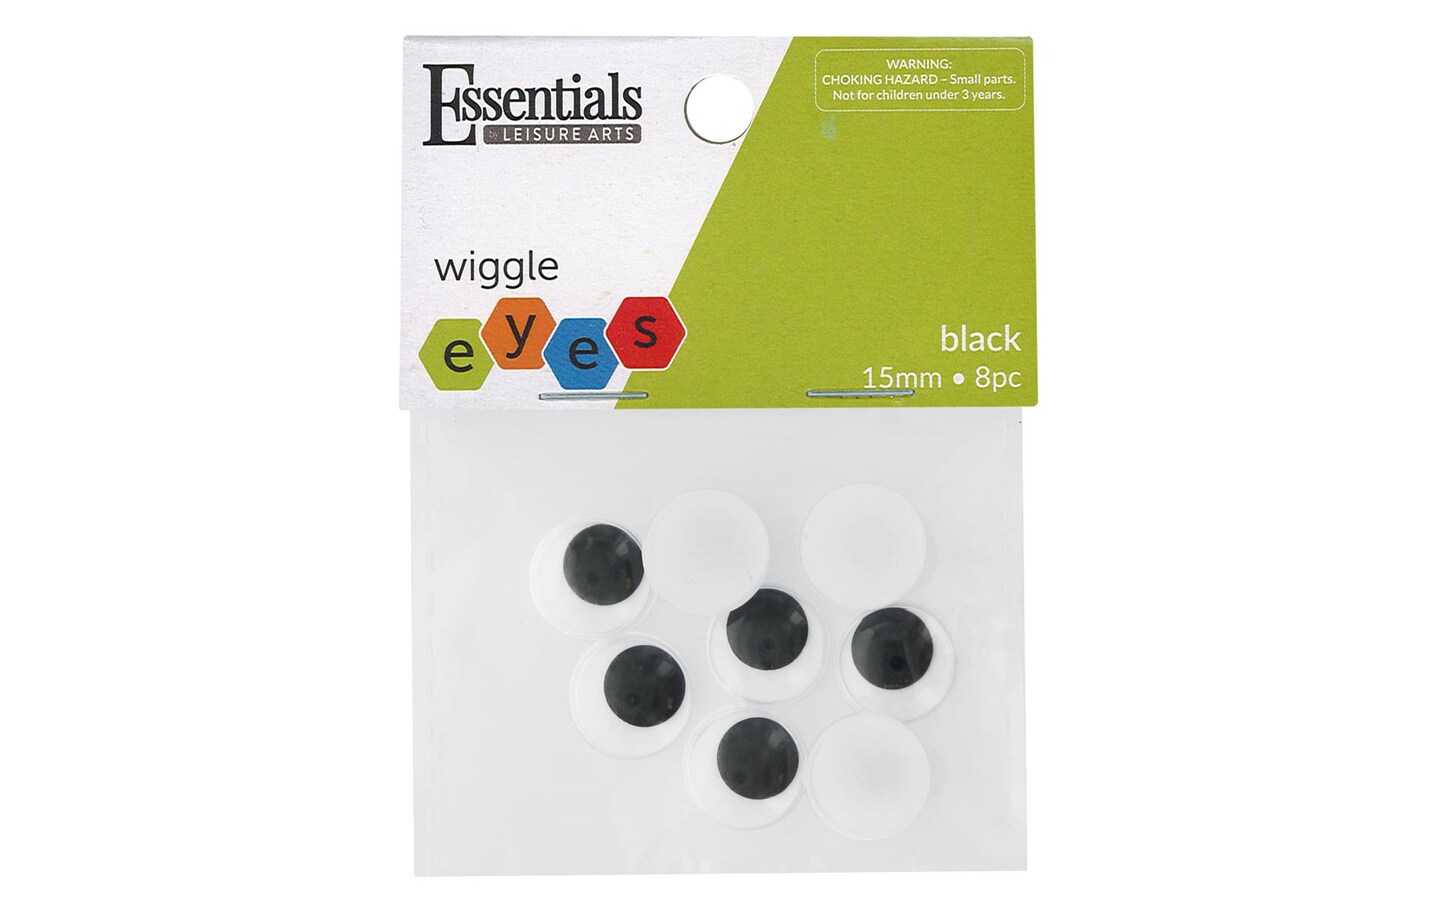 Essentials by Leisure Arts Eyes Paste On Moveable 15mm Black 8pc Googly  Eyes, Google Eyes for Crafts, Big Googly Eyes for Crafts, Wiggle Eyes,  Craft